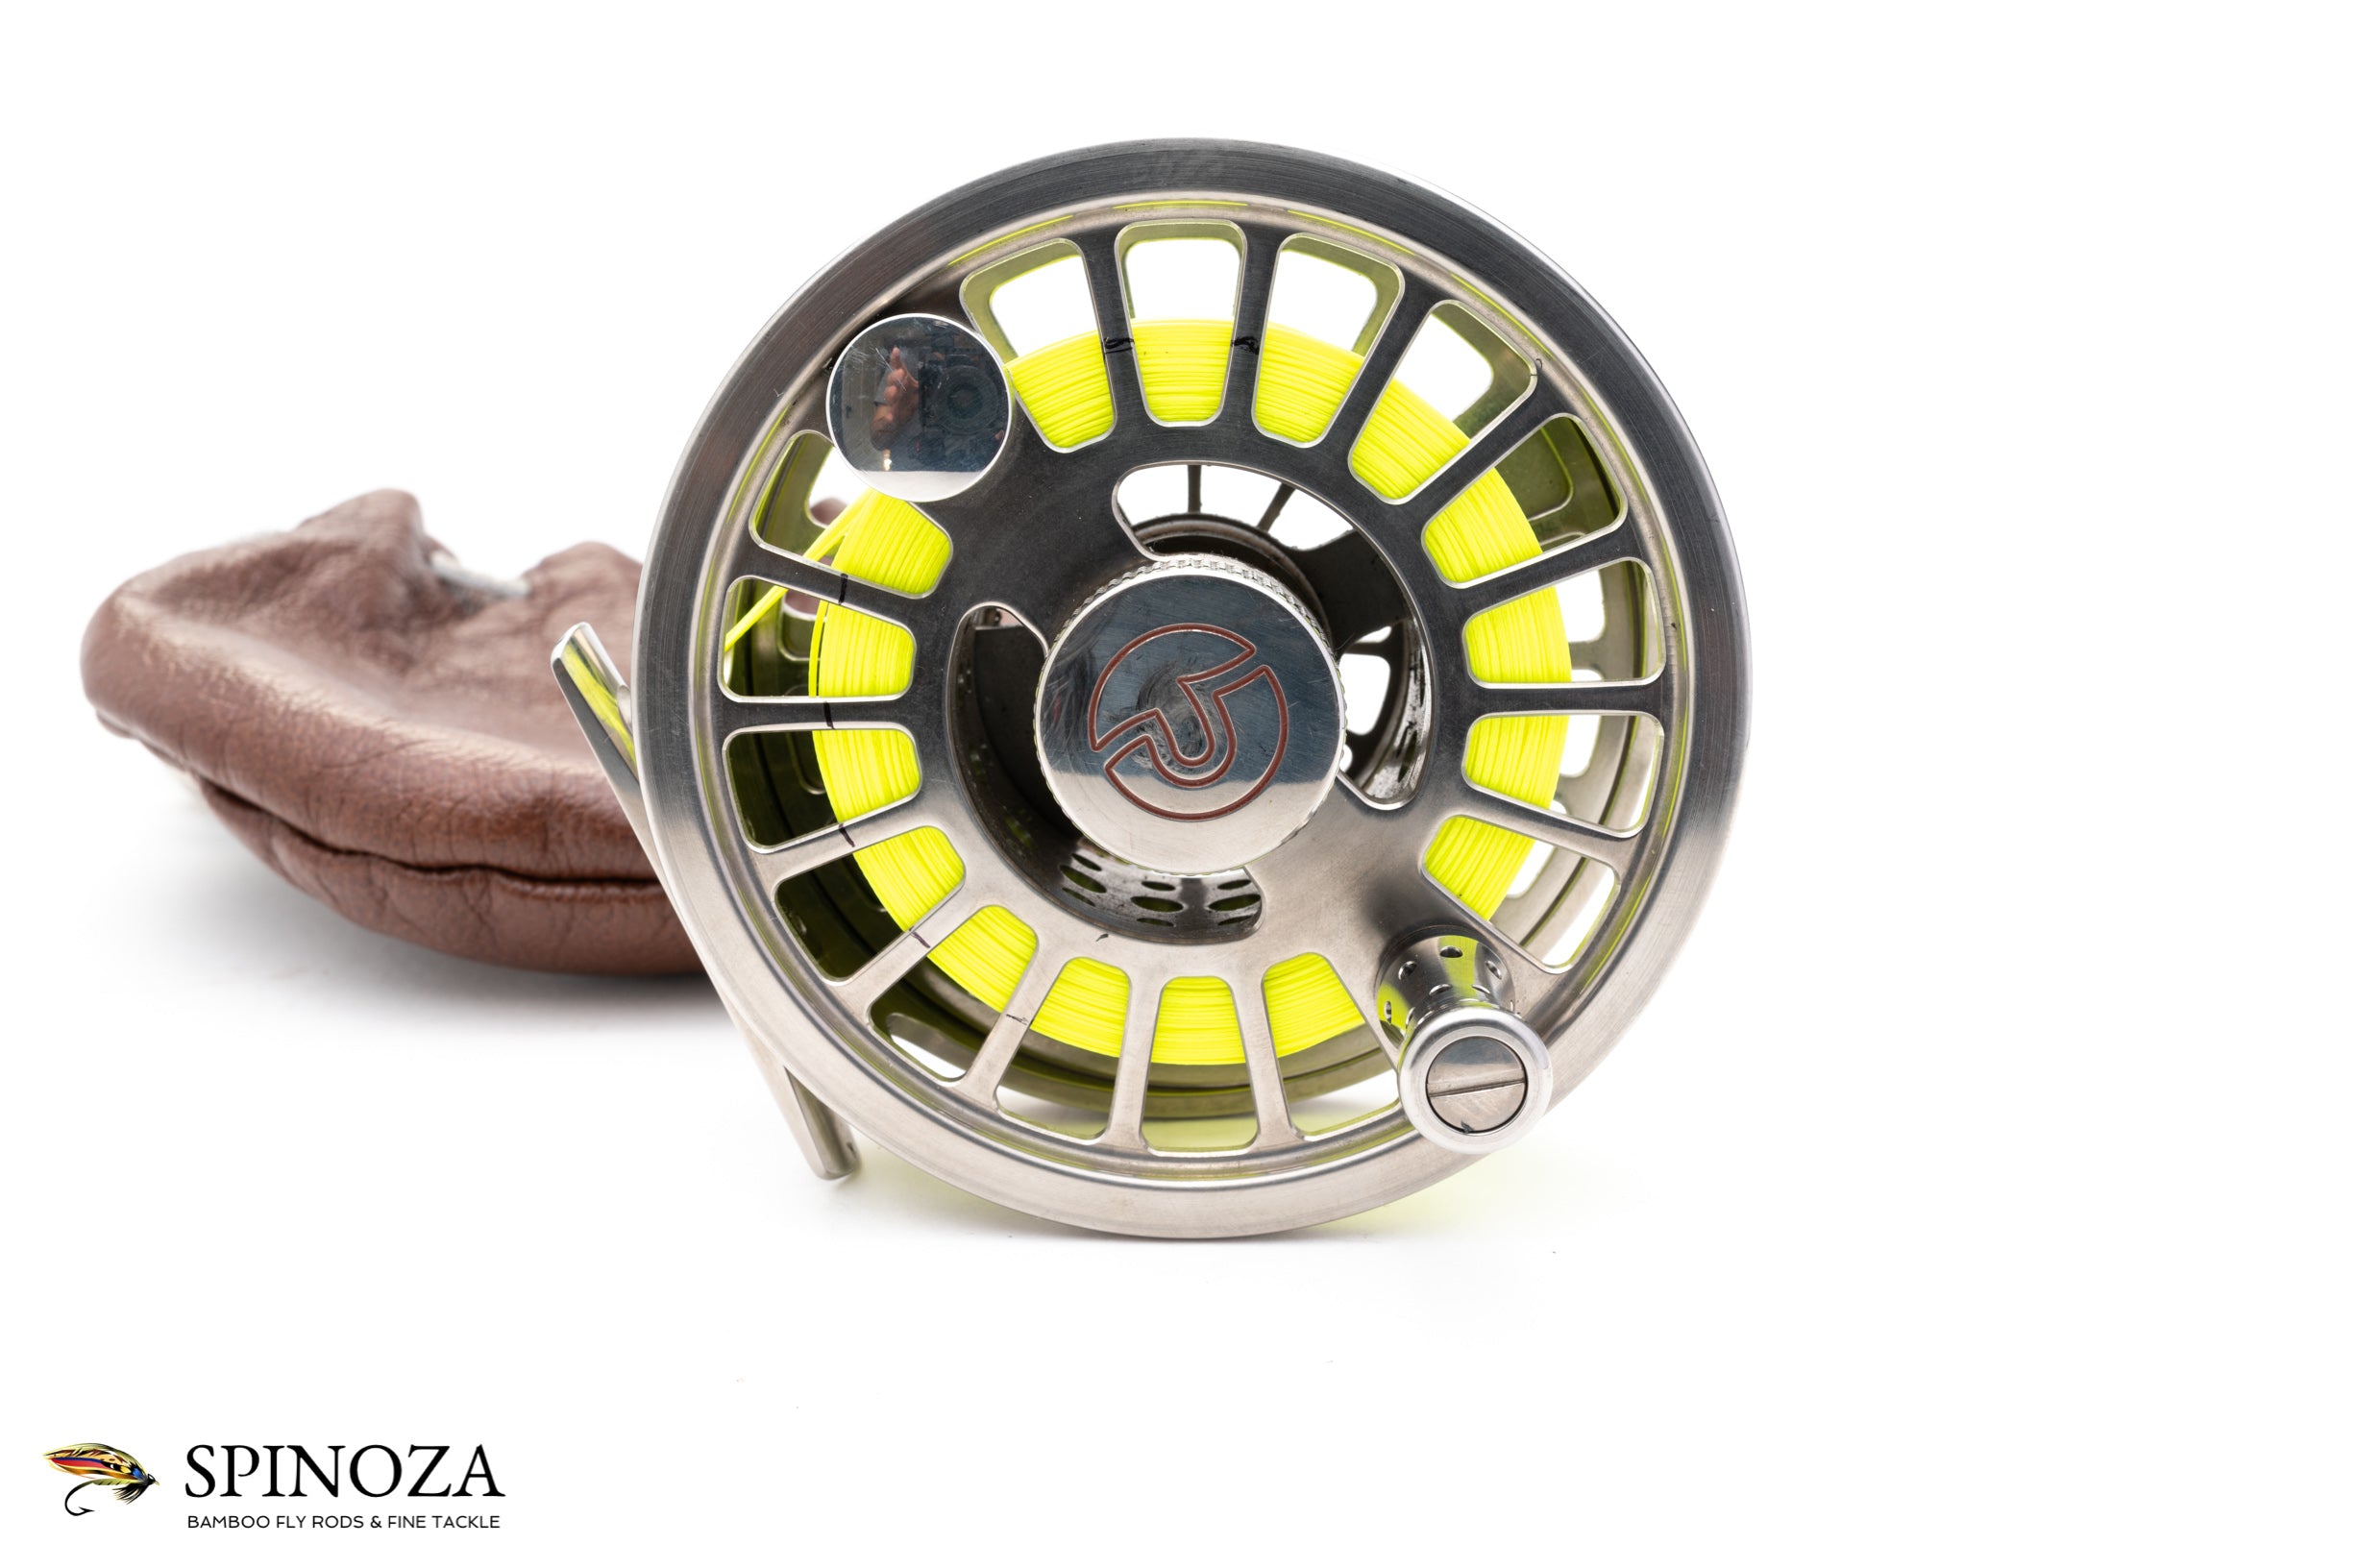 VR Design's 'Trutta Perfection' Fly Reel 2/0, Page 2